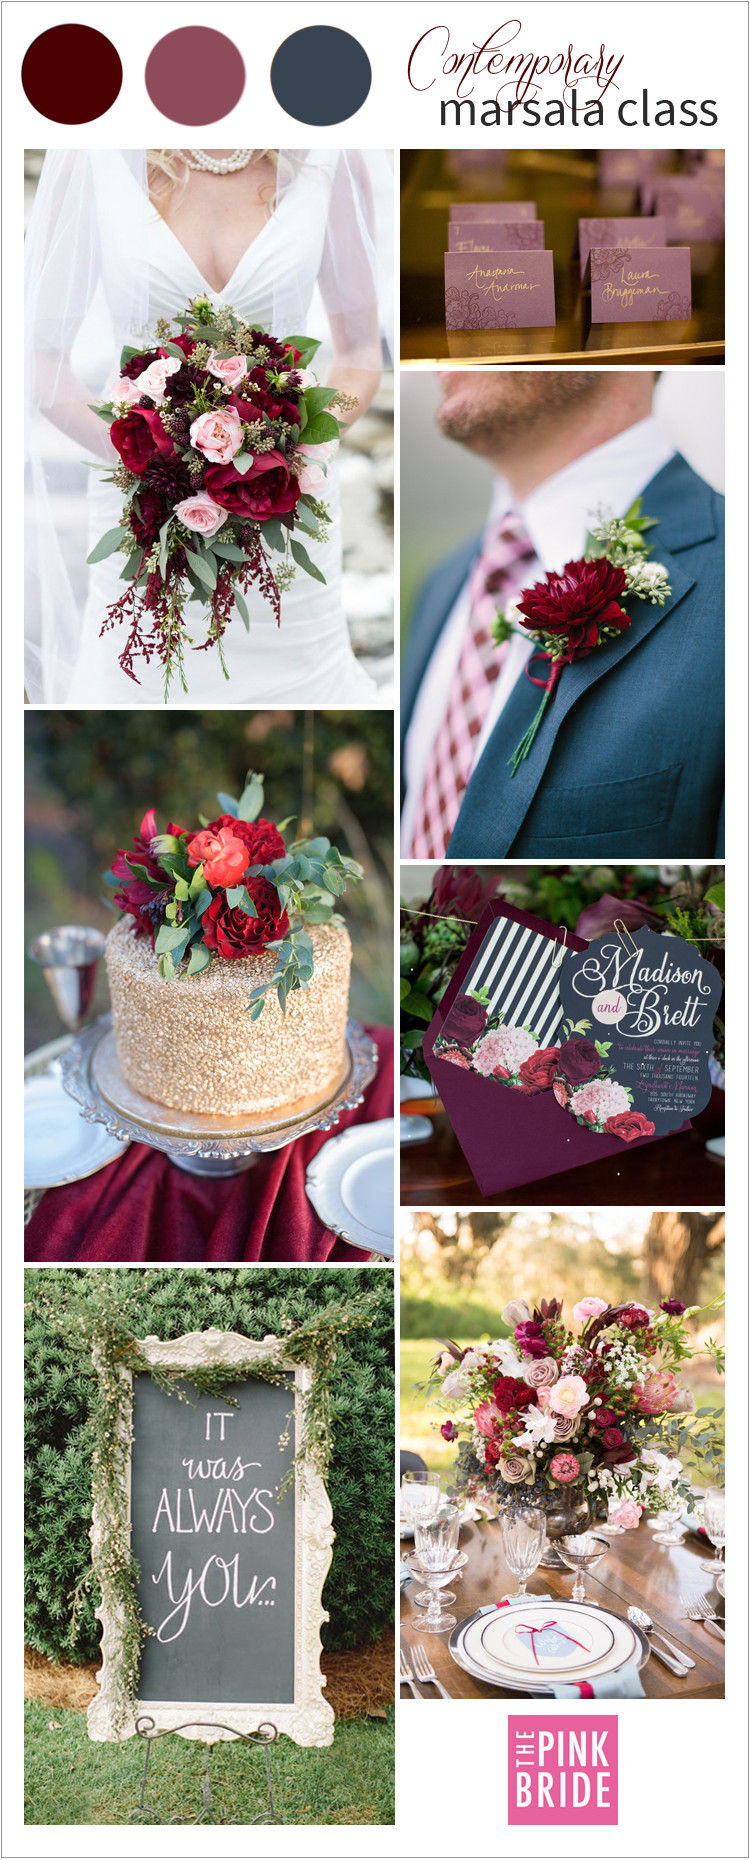 Color Palette For Wedding
 Wedding Color Board Contemporary Marsala Class The Pink